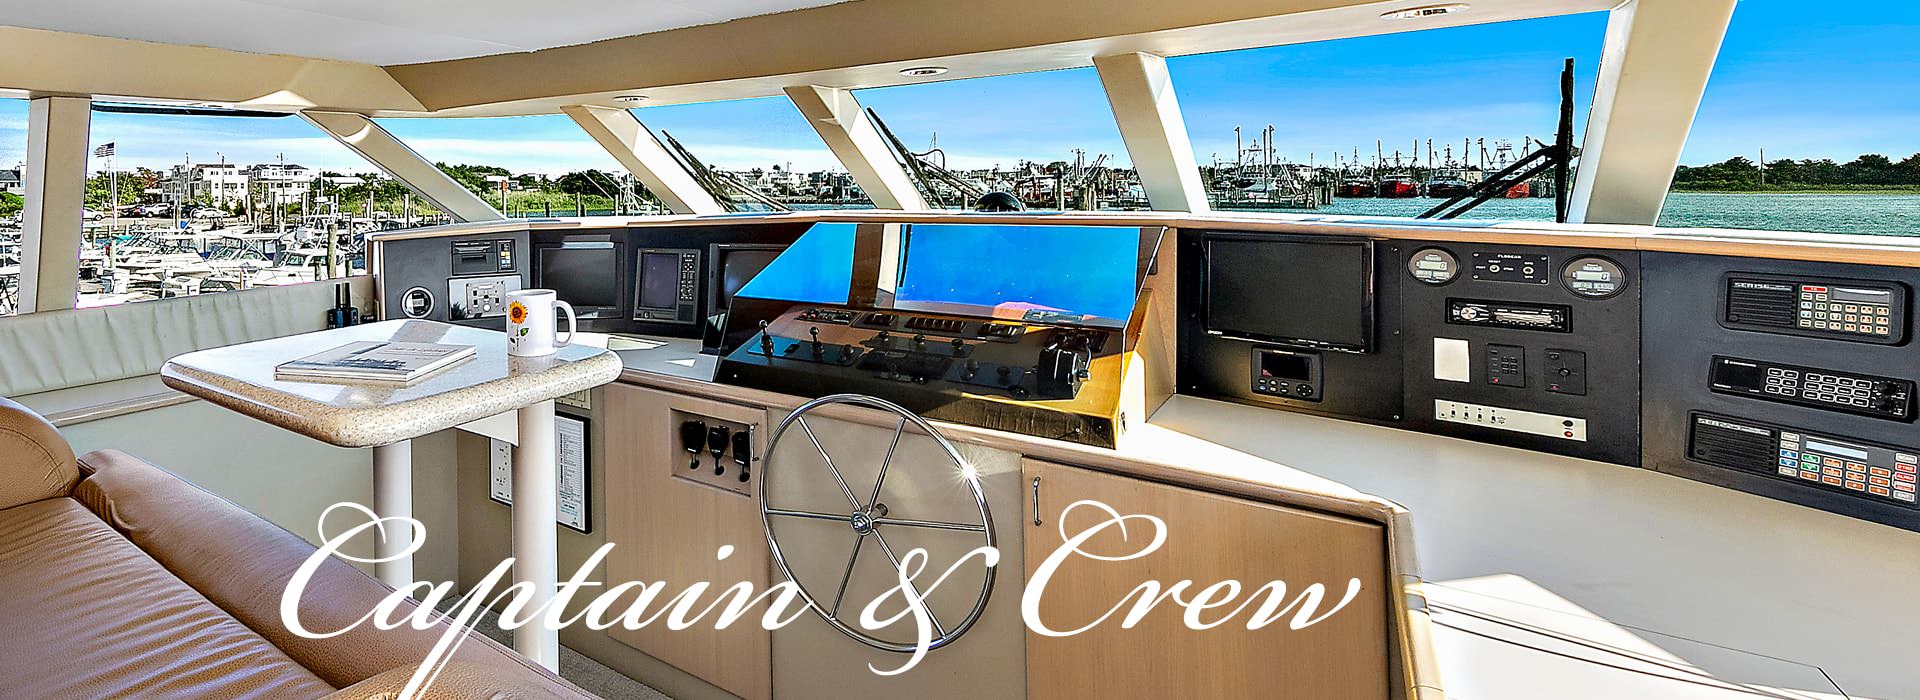 Bridge of yacht with light brown leather chair and small table and the words Captain & Crew in white